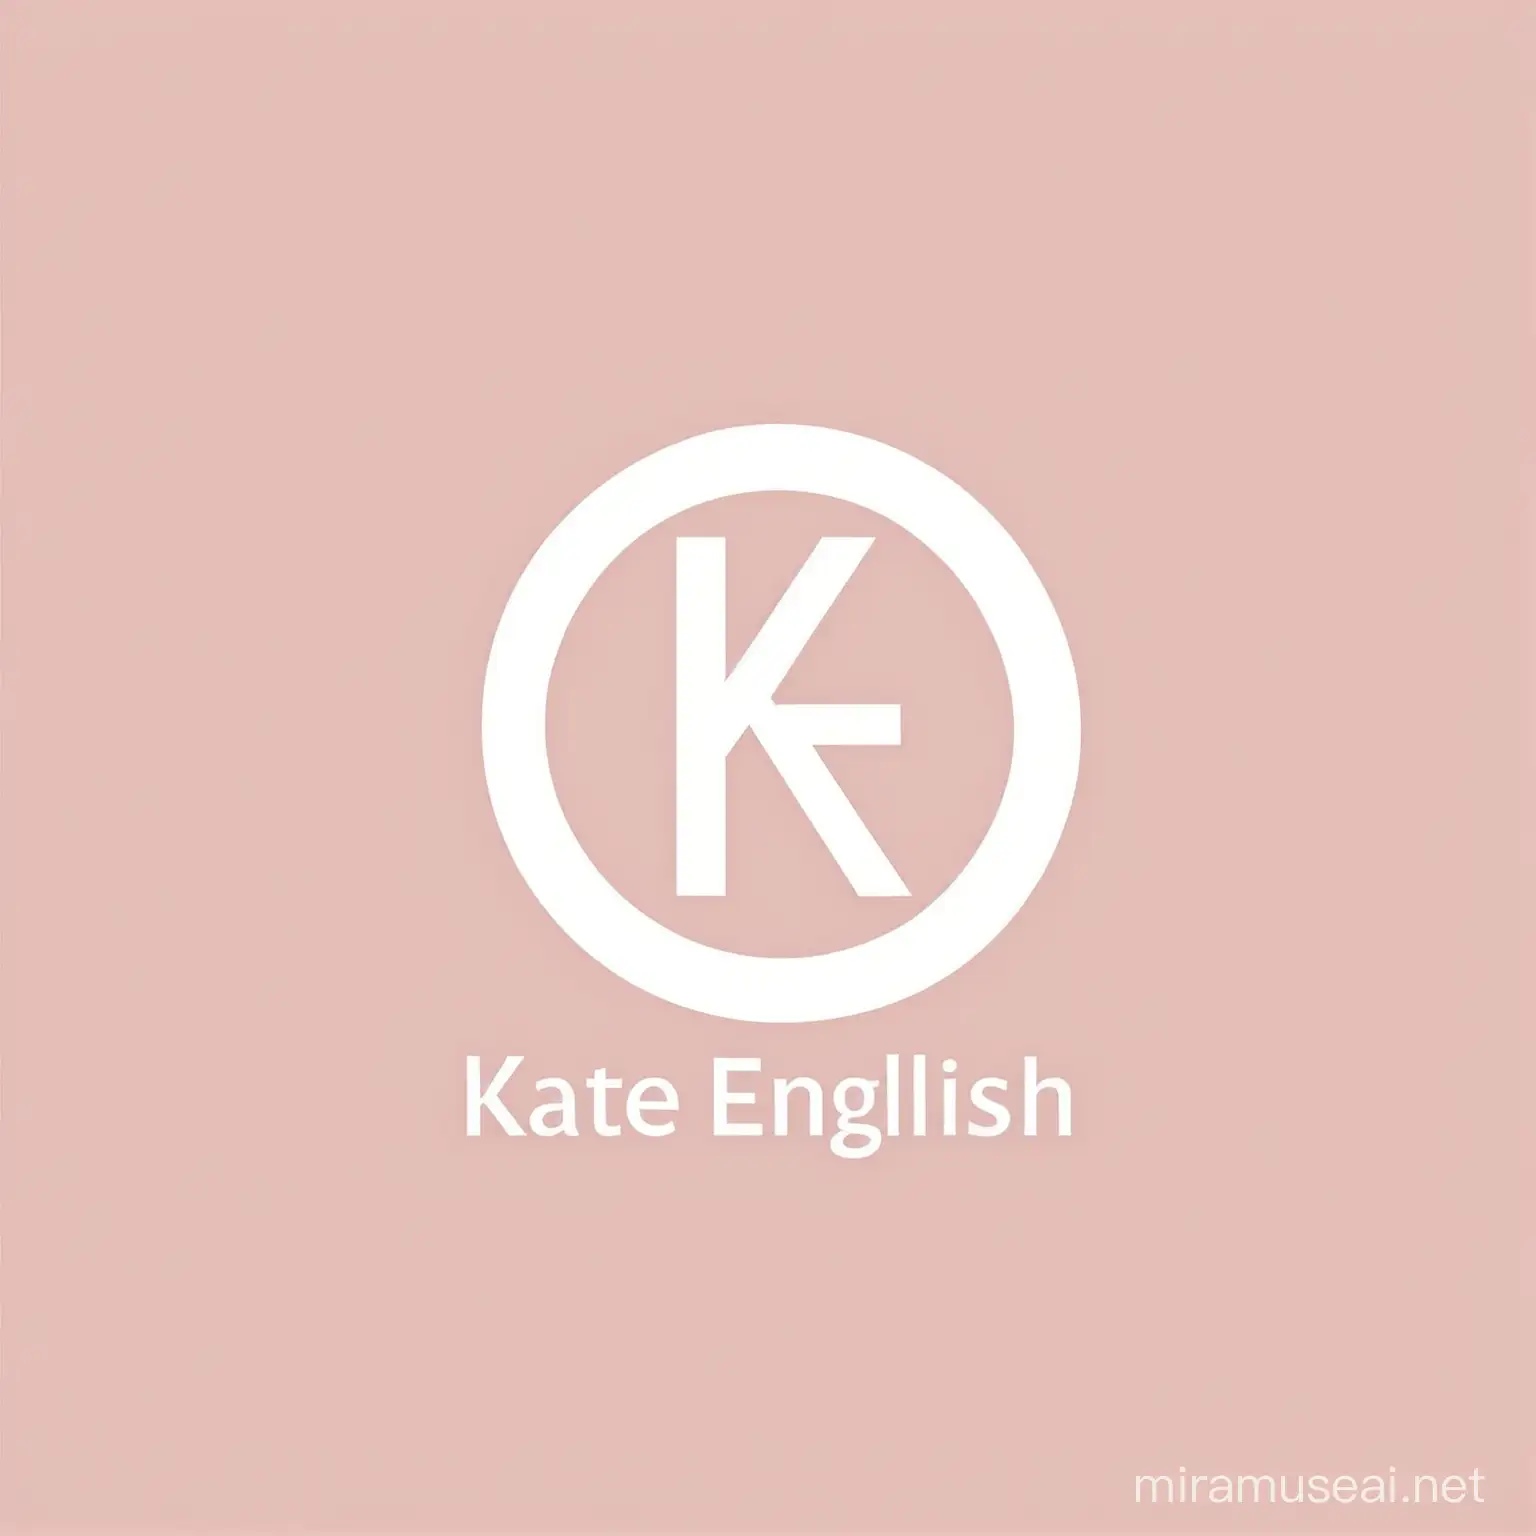 A very minimalistic logo design for English courses where the teachers name is "Kate English" inisials modern style learn smart easy Paul Rand style KE